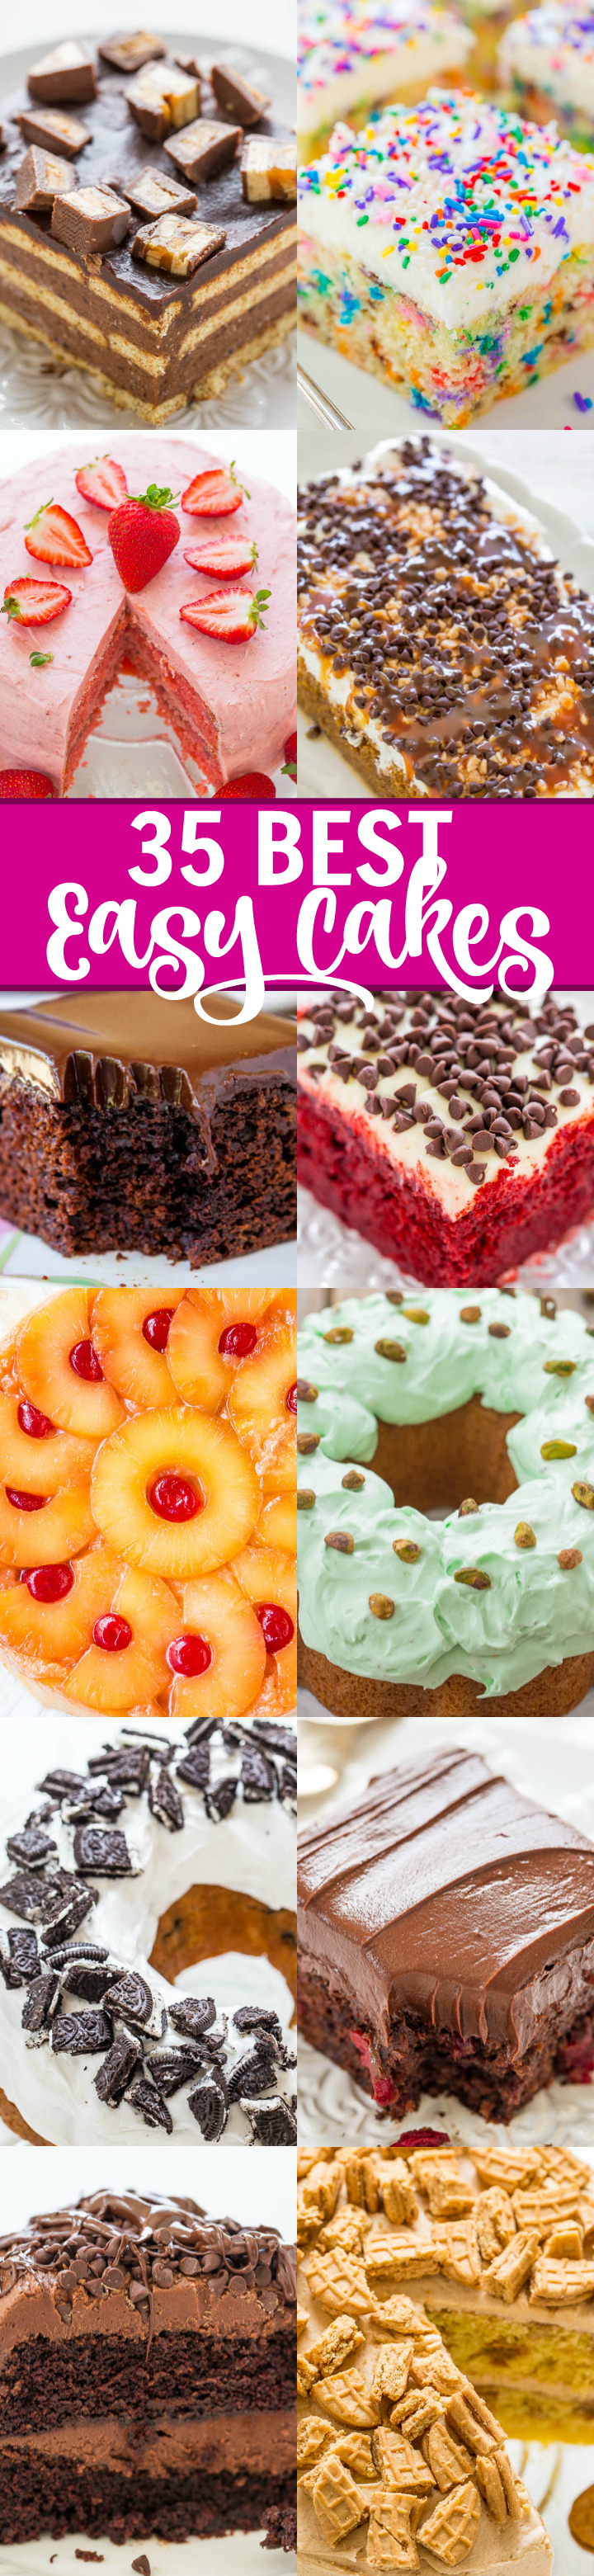 35 BEST Easy Cakes - Whether it's a birthday cake, anniversary cake, or a just-because cake, you'll find the perfect EASY cake here!! Only the BEST recipes including chocolate, fruity, pumpkin, red velvet, and more!! 